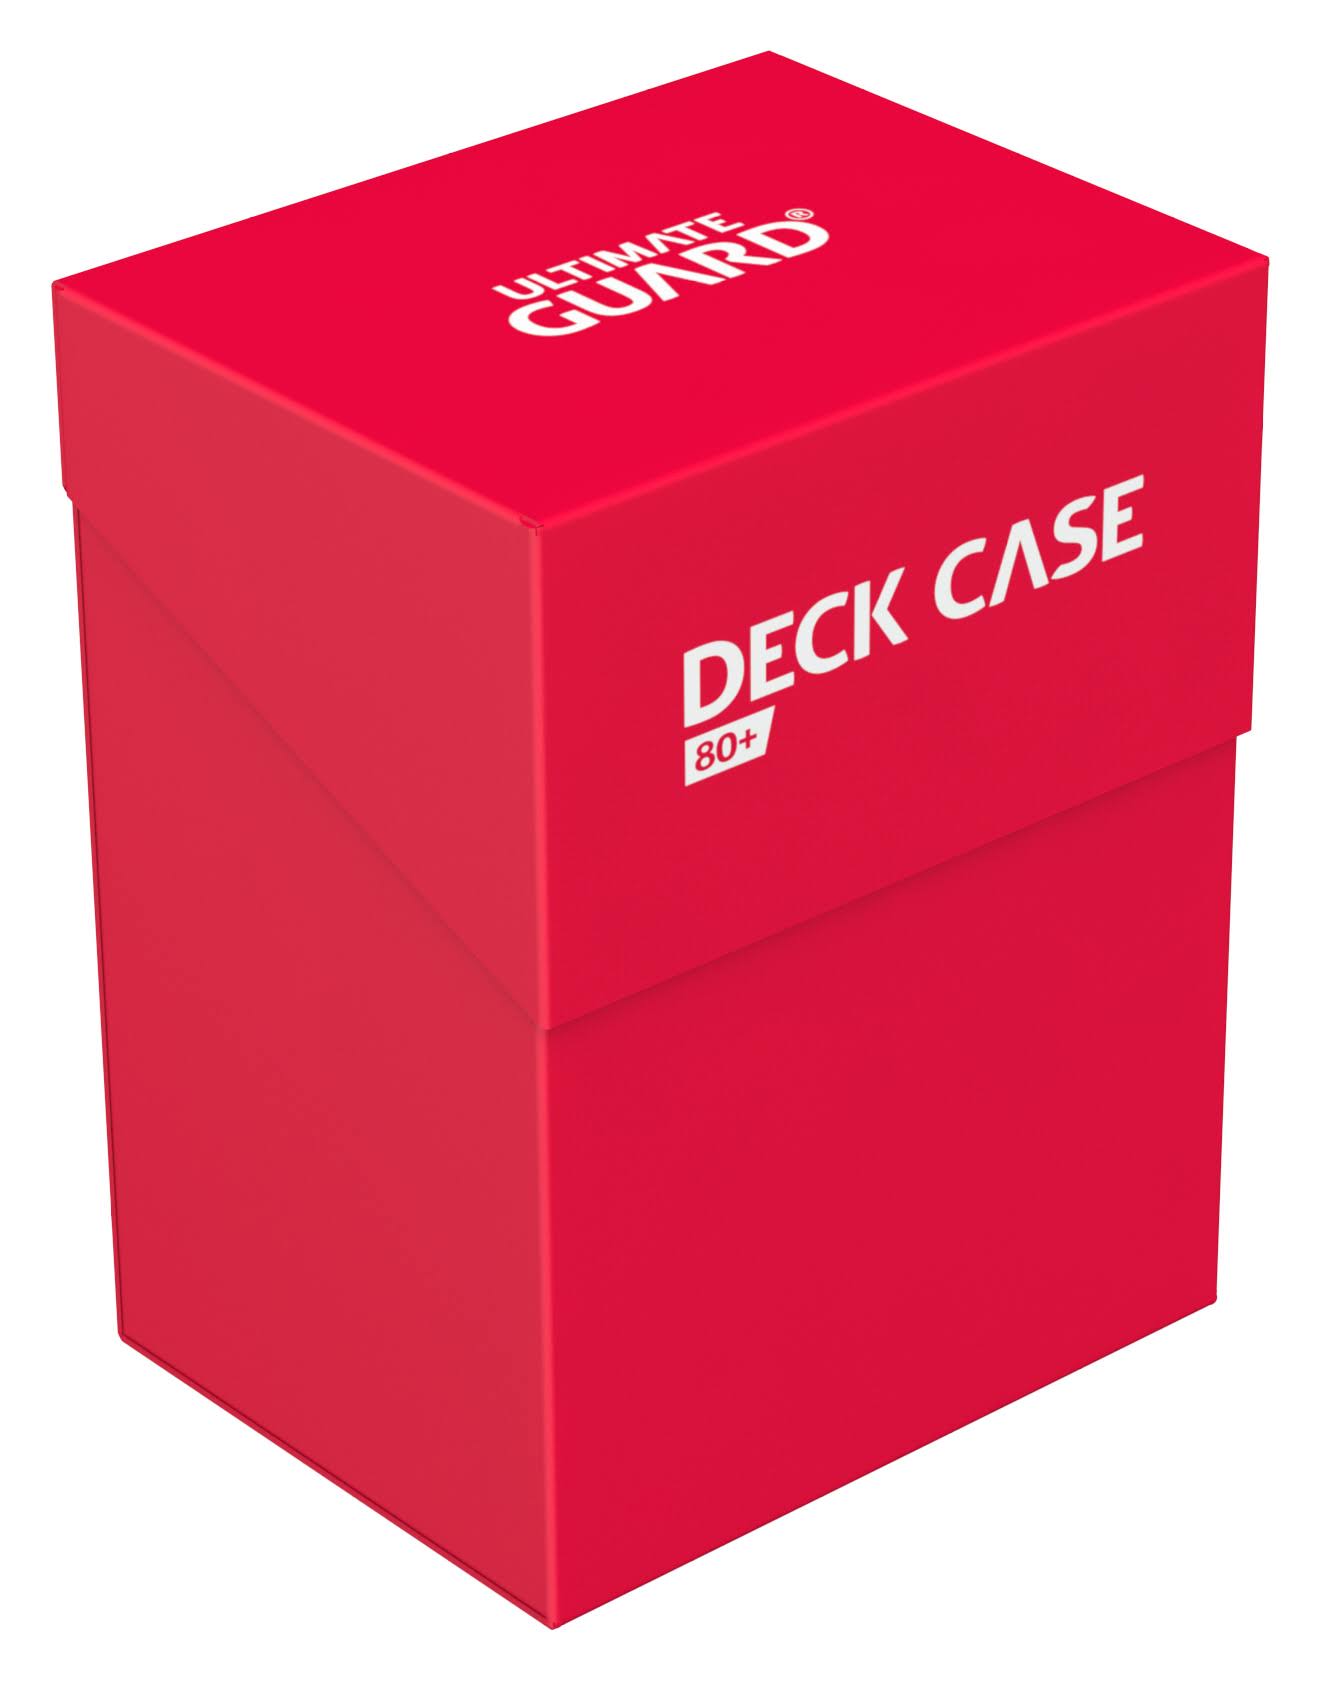 Ultimate Guard Card Deck Case - Red